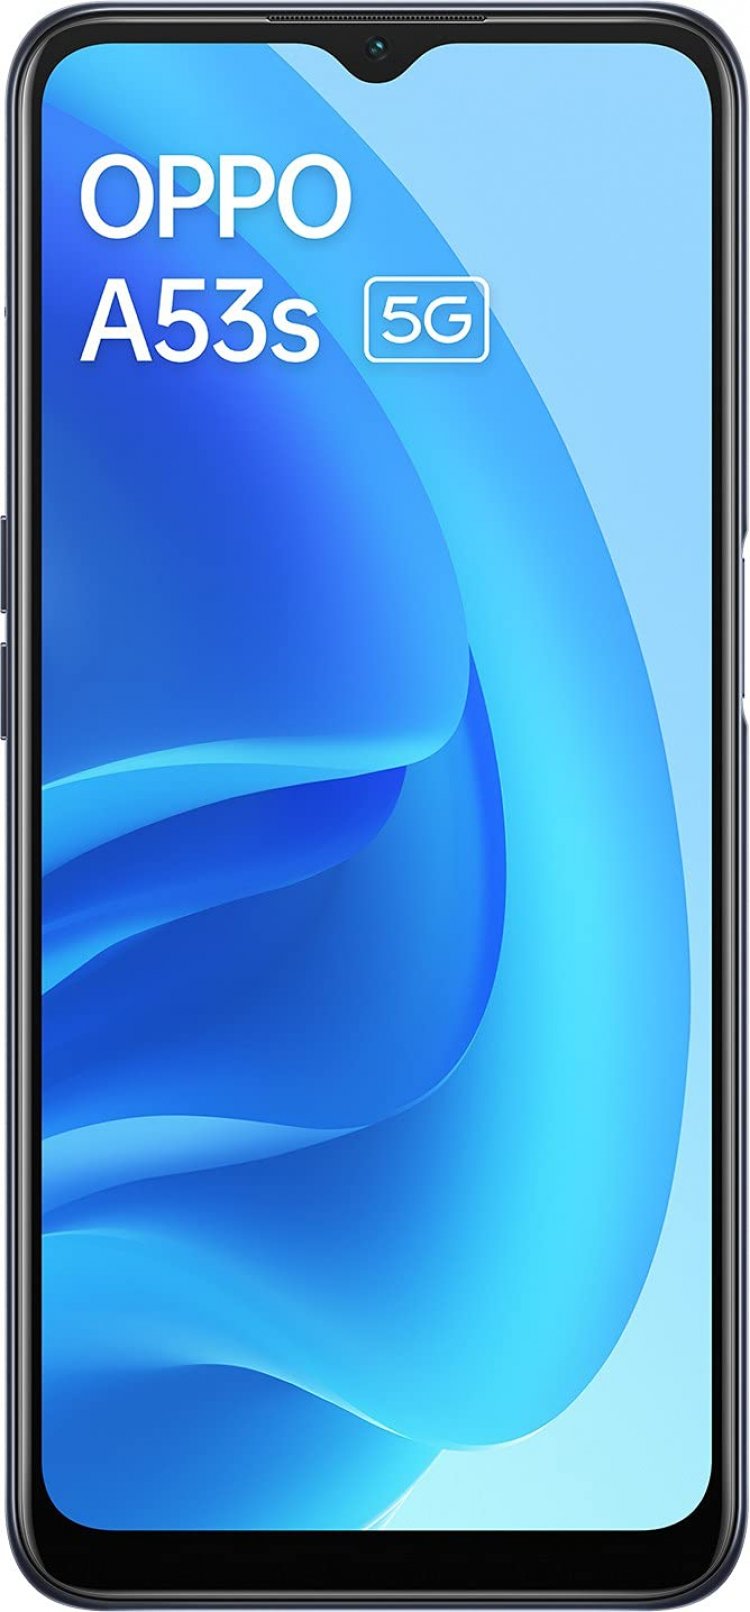 OPPO A53s 5G (Ink Black, 8GB RAM, 128GB Storage) At just Rs. 15,990 [MRP 18,990]